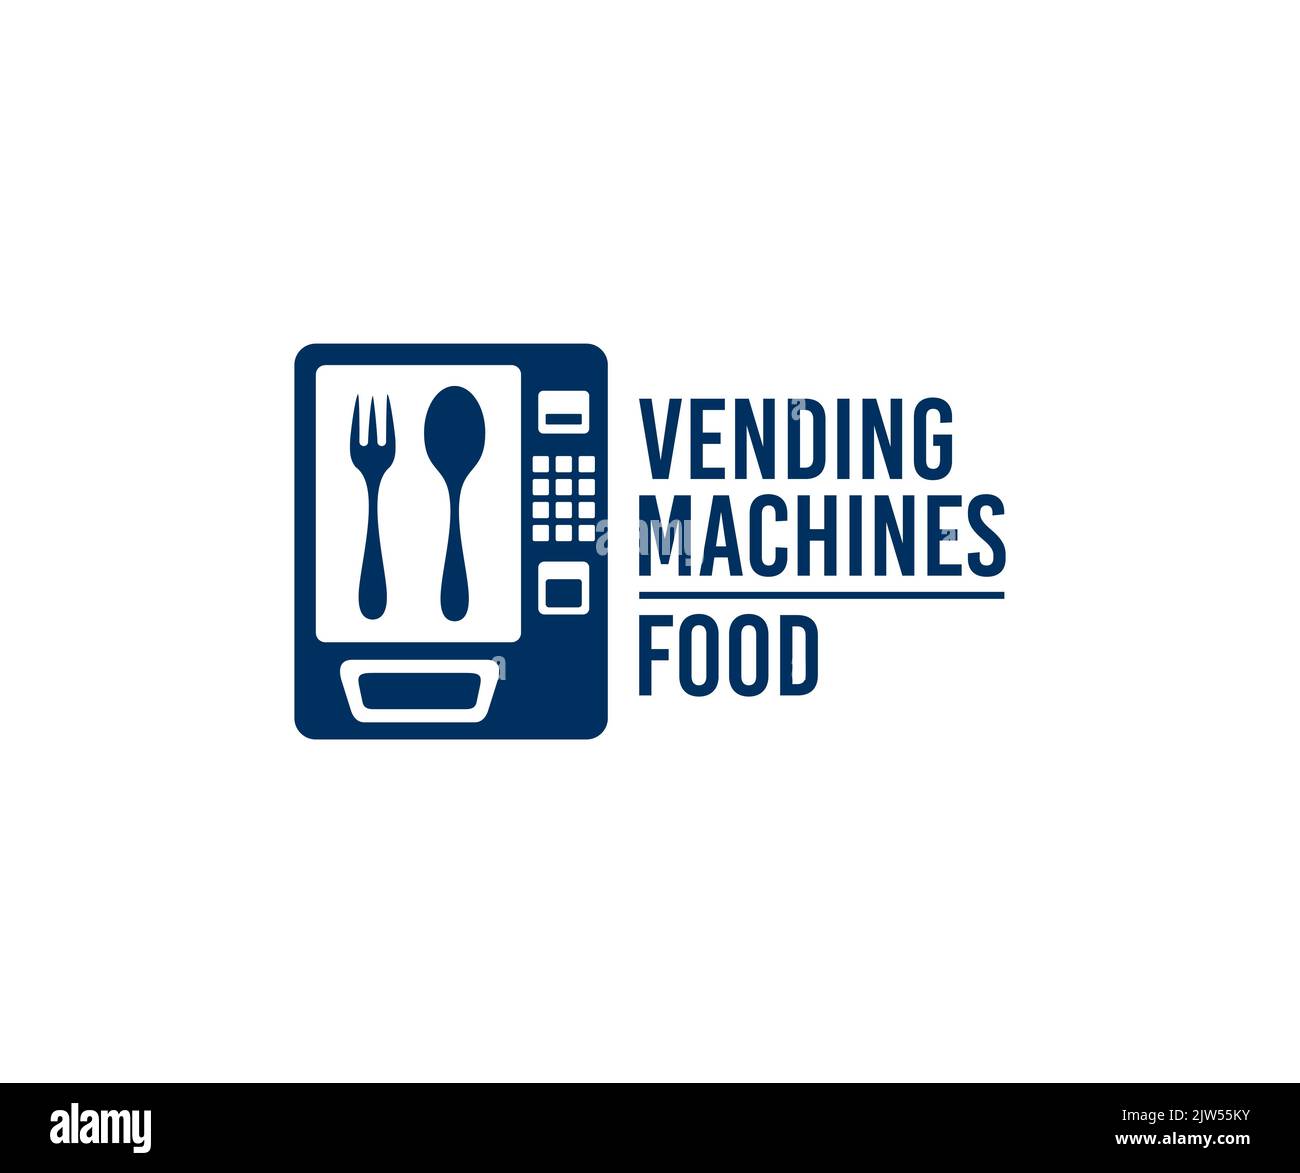 Vending machines on sale of food and snacks, logo design. Buying food in packaging and food packs, automatic selling or sell, consumption Stock Vector